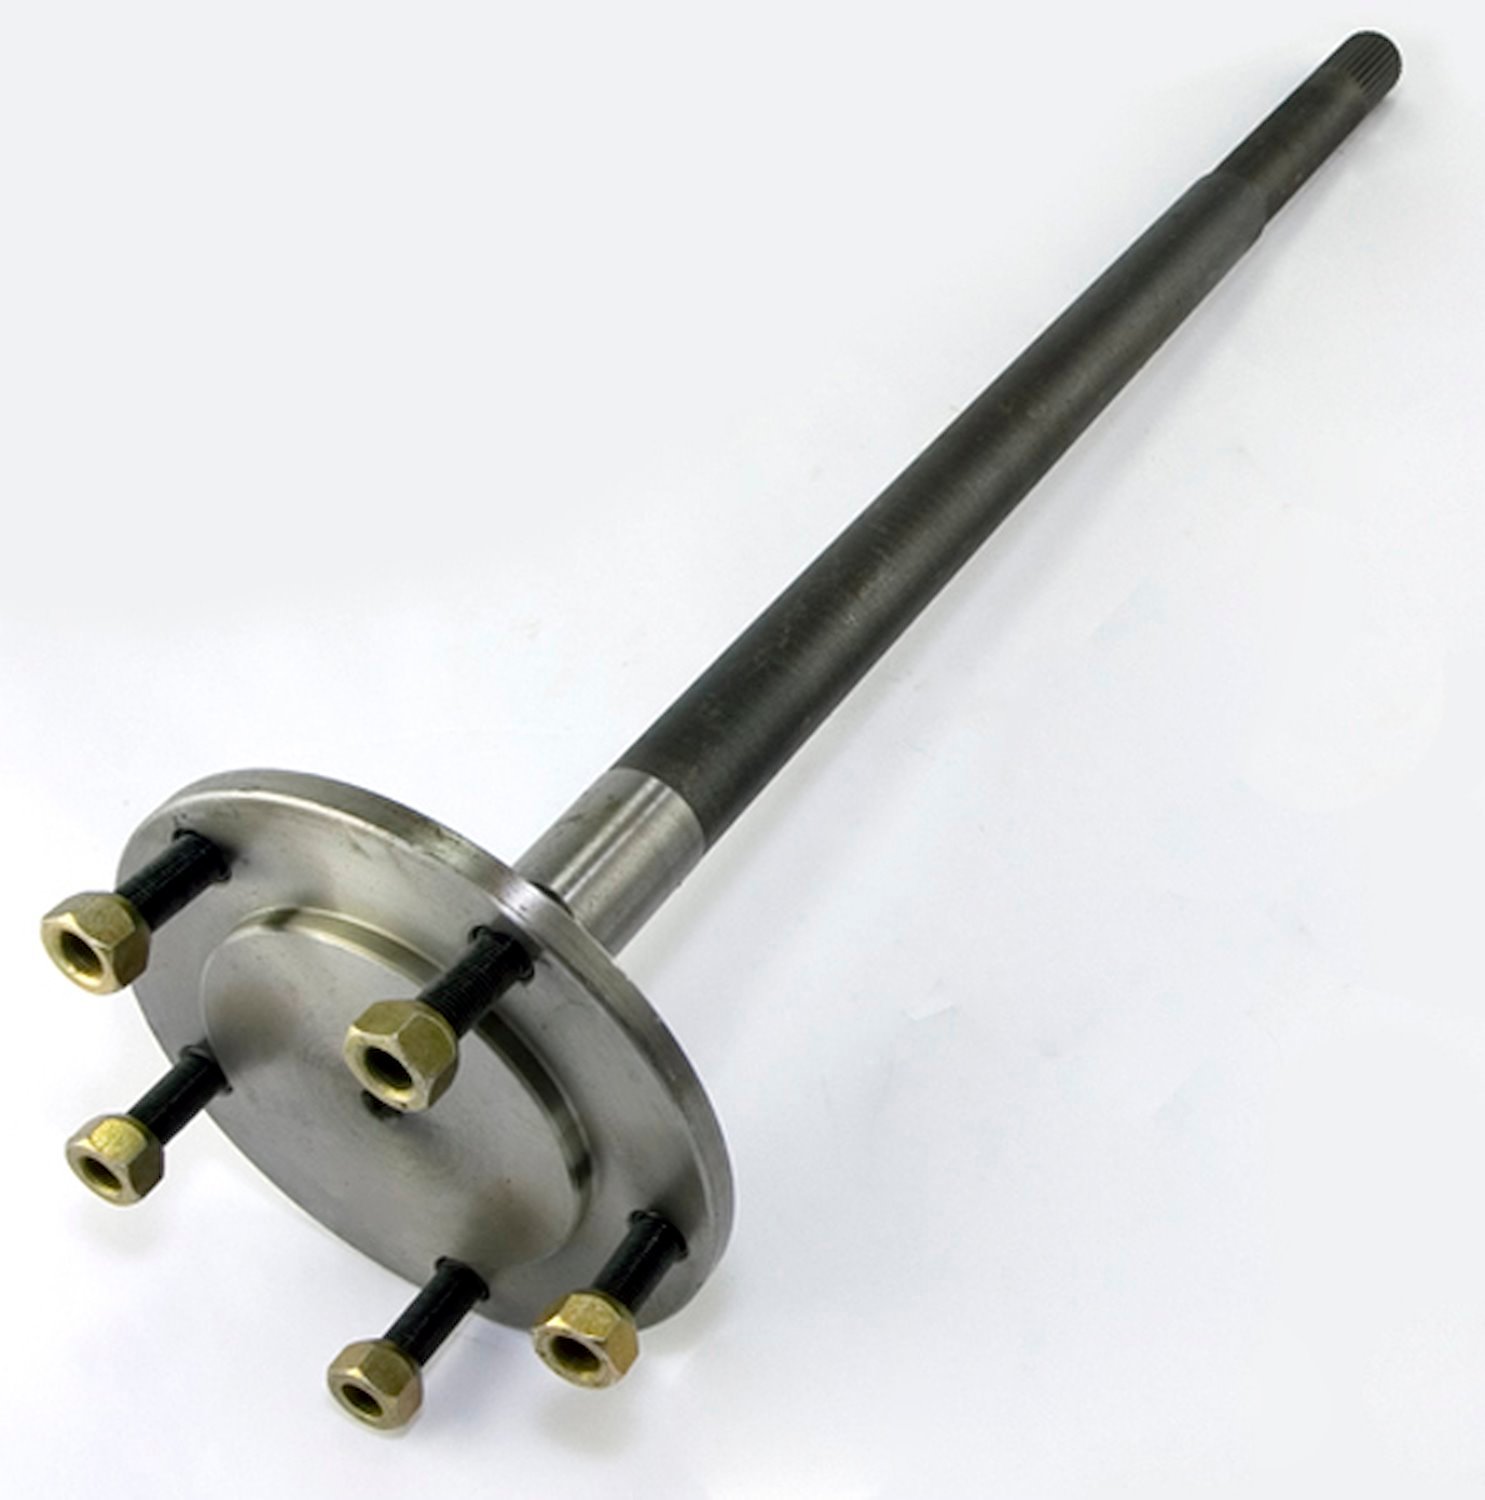 This 1 piece rear AMC20 axle shaft from Omix-ADA fits 82-86 Jeep CJ models. The axle shaft is 28.44 inches long. Right side.